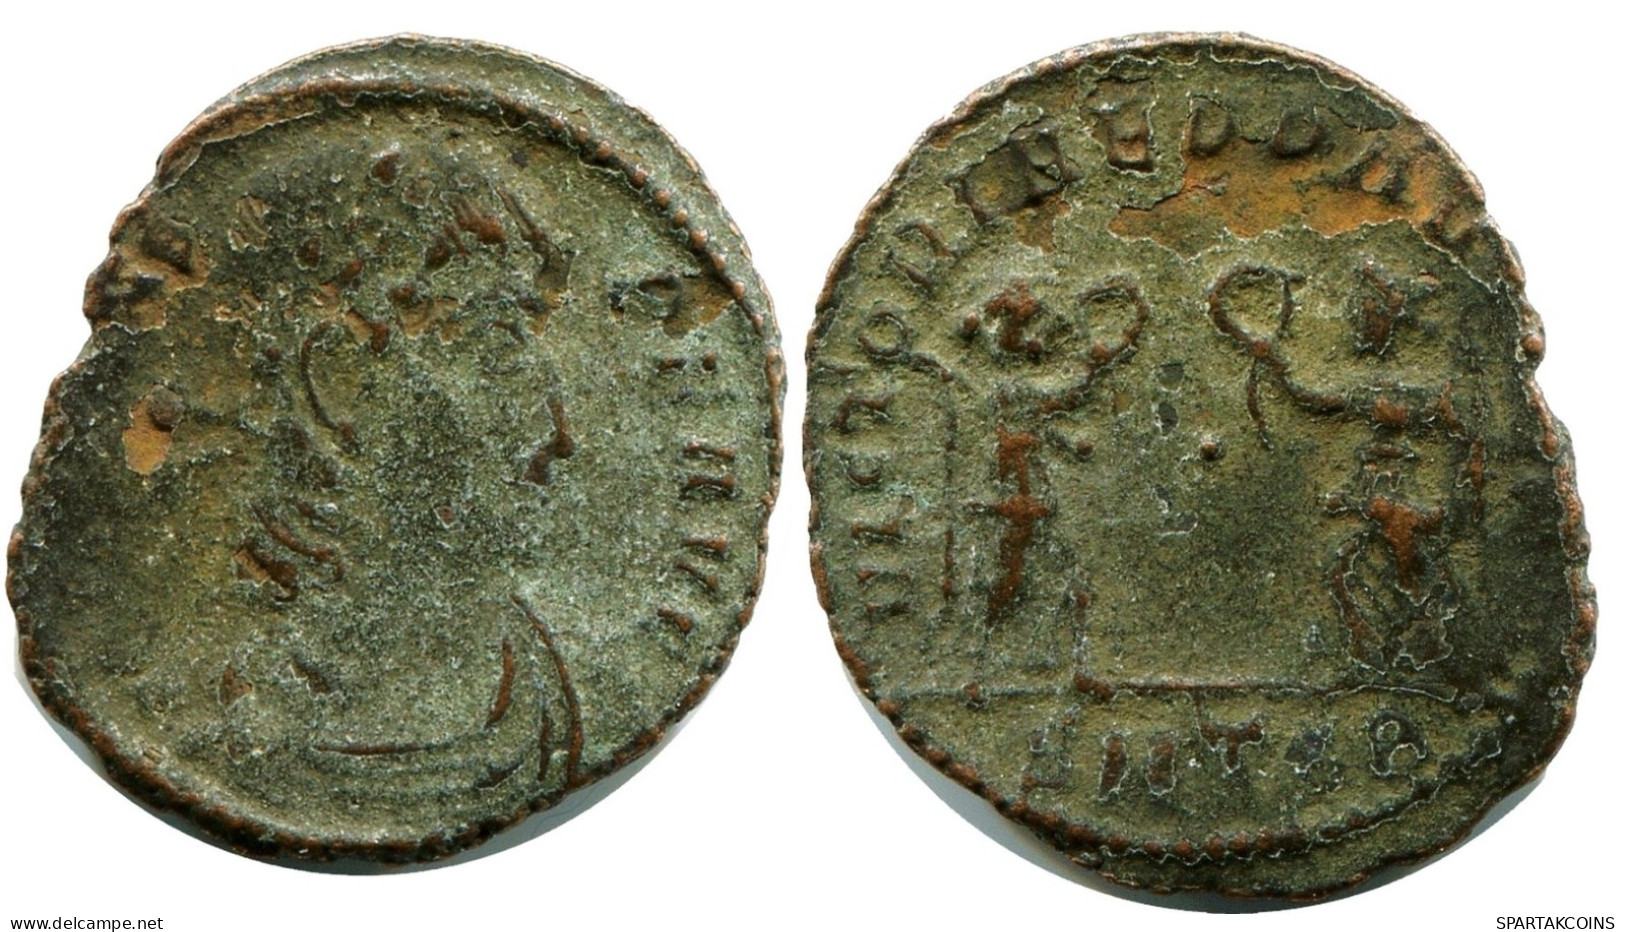 CONSTANS MINTED IN THESSALONICA FROM THE ROYAL ONTARIO MUSEUM #ANC11887.14.D.A - L'Empire Chrétien (307 à 363)